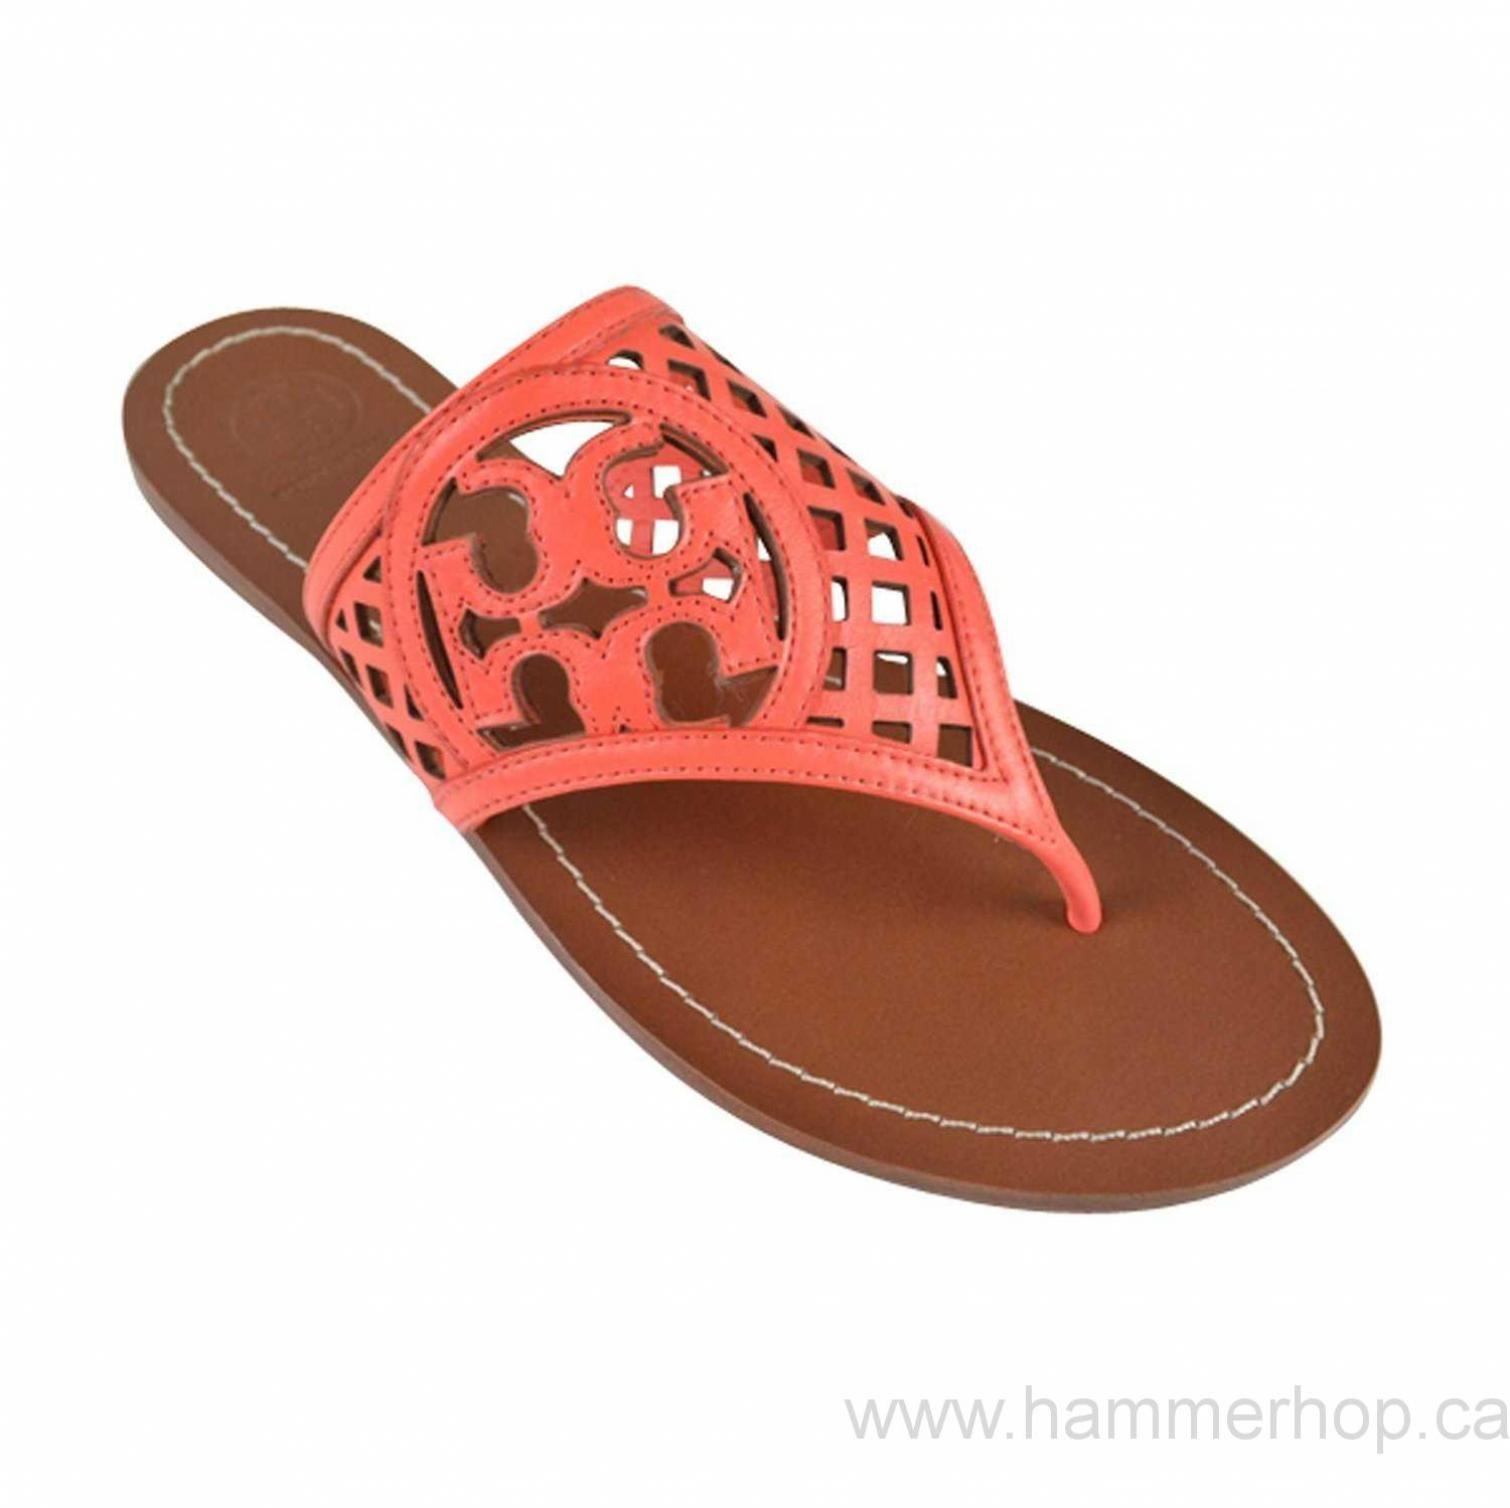 Poppy Shoes Logo - Canada Women's Burch THATCHED PERFORATED Flip Flop Leather